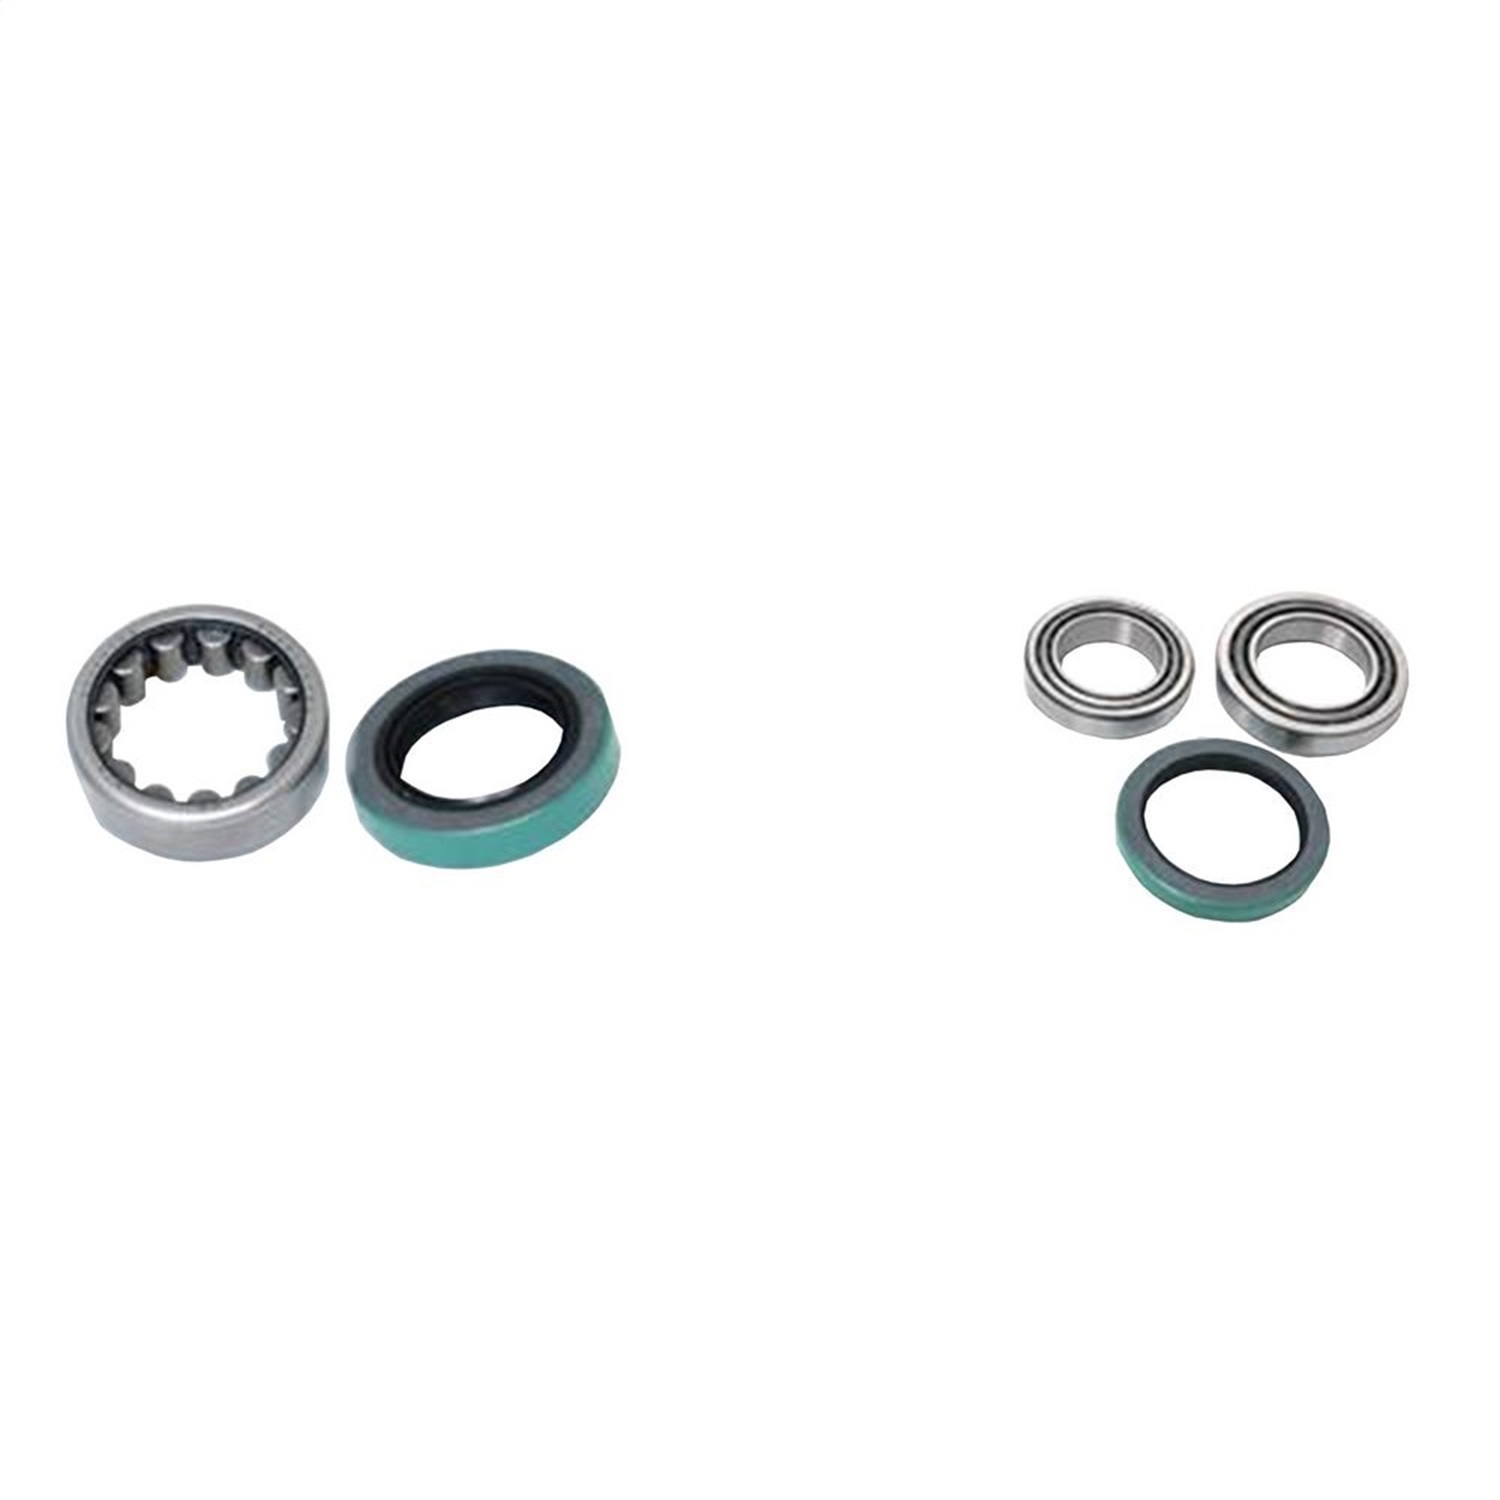 G2 Axle and Gear G2 Axle and Gear 30-8012 Wheel Bearing Kit